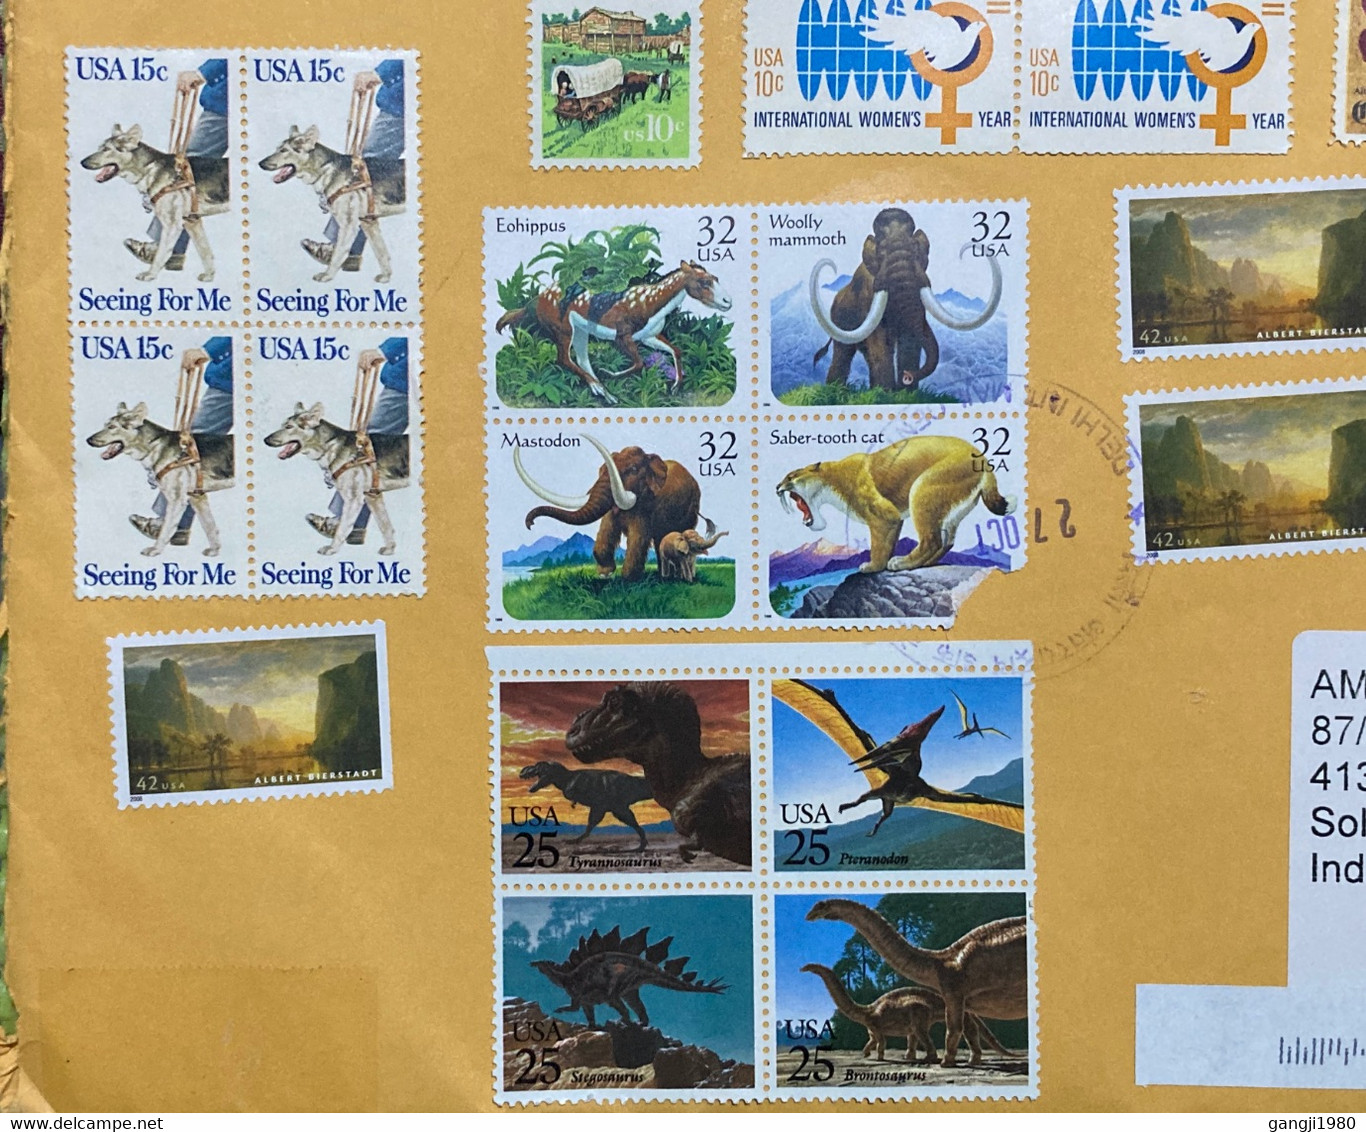 USA COVER TO INDIA 2022, TOTAL 36 STAMPS AFFIXED MOSTLY WITHOUT CANCELLATION,FACE VALUE 6 DOLLAR !!! ELEPHANT, Dinosaur, - Covers & Documents